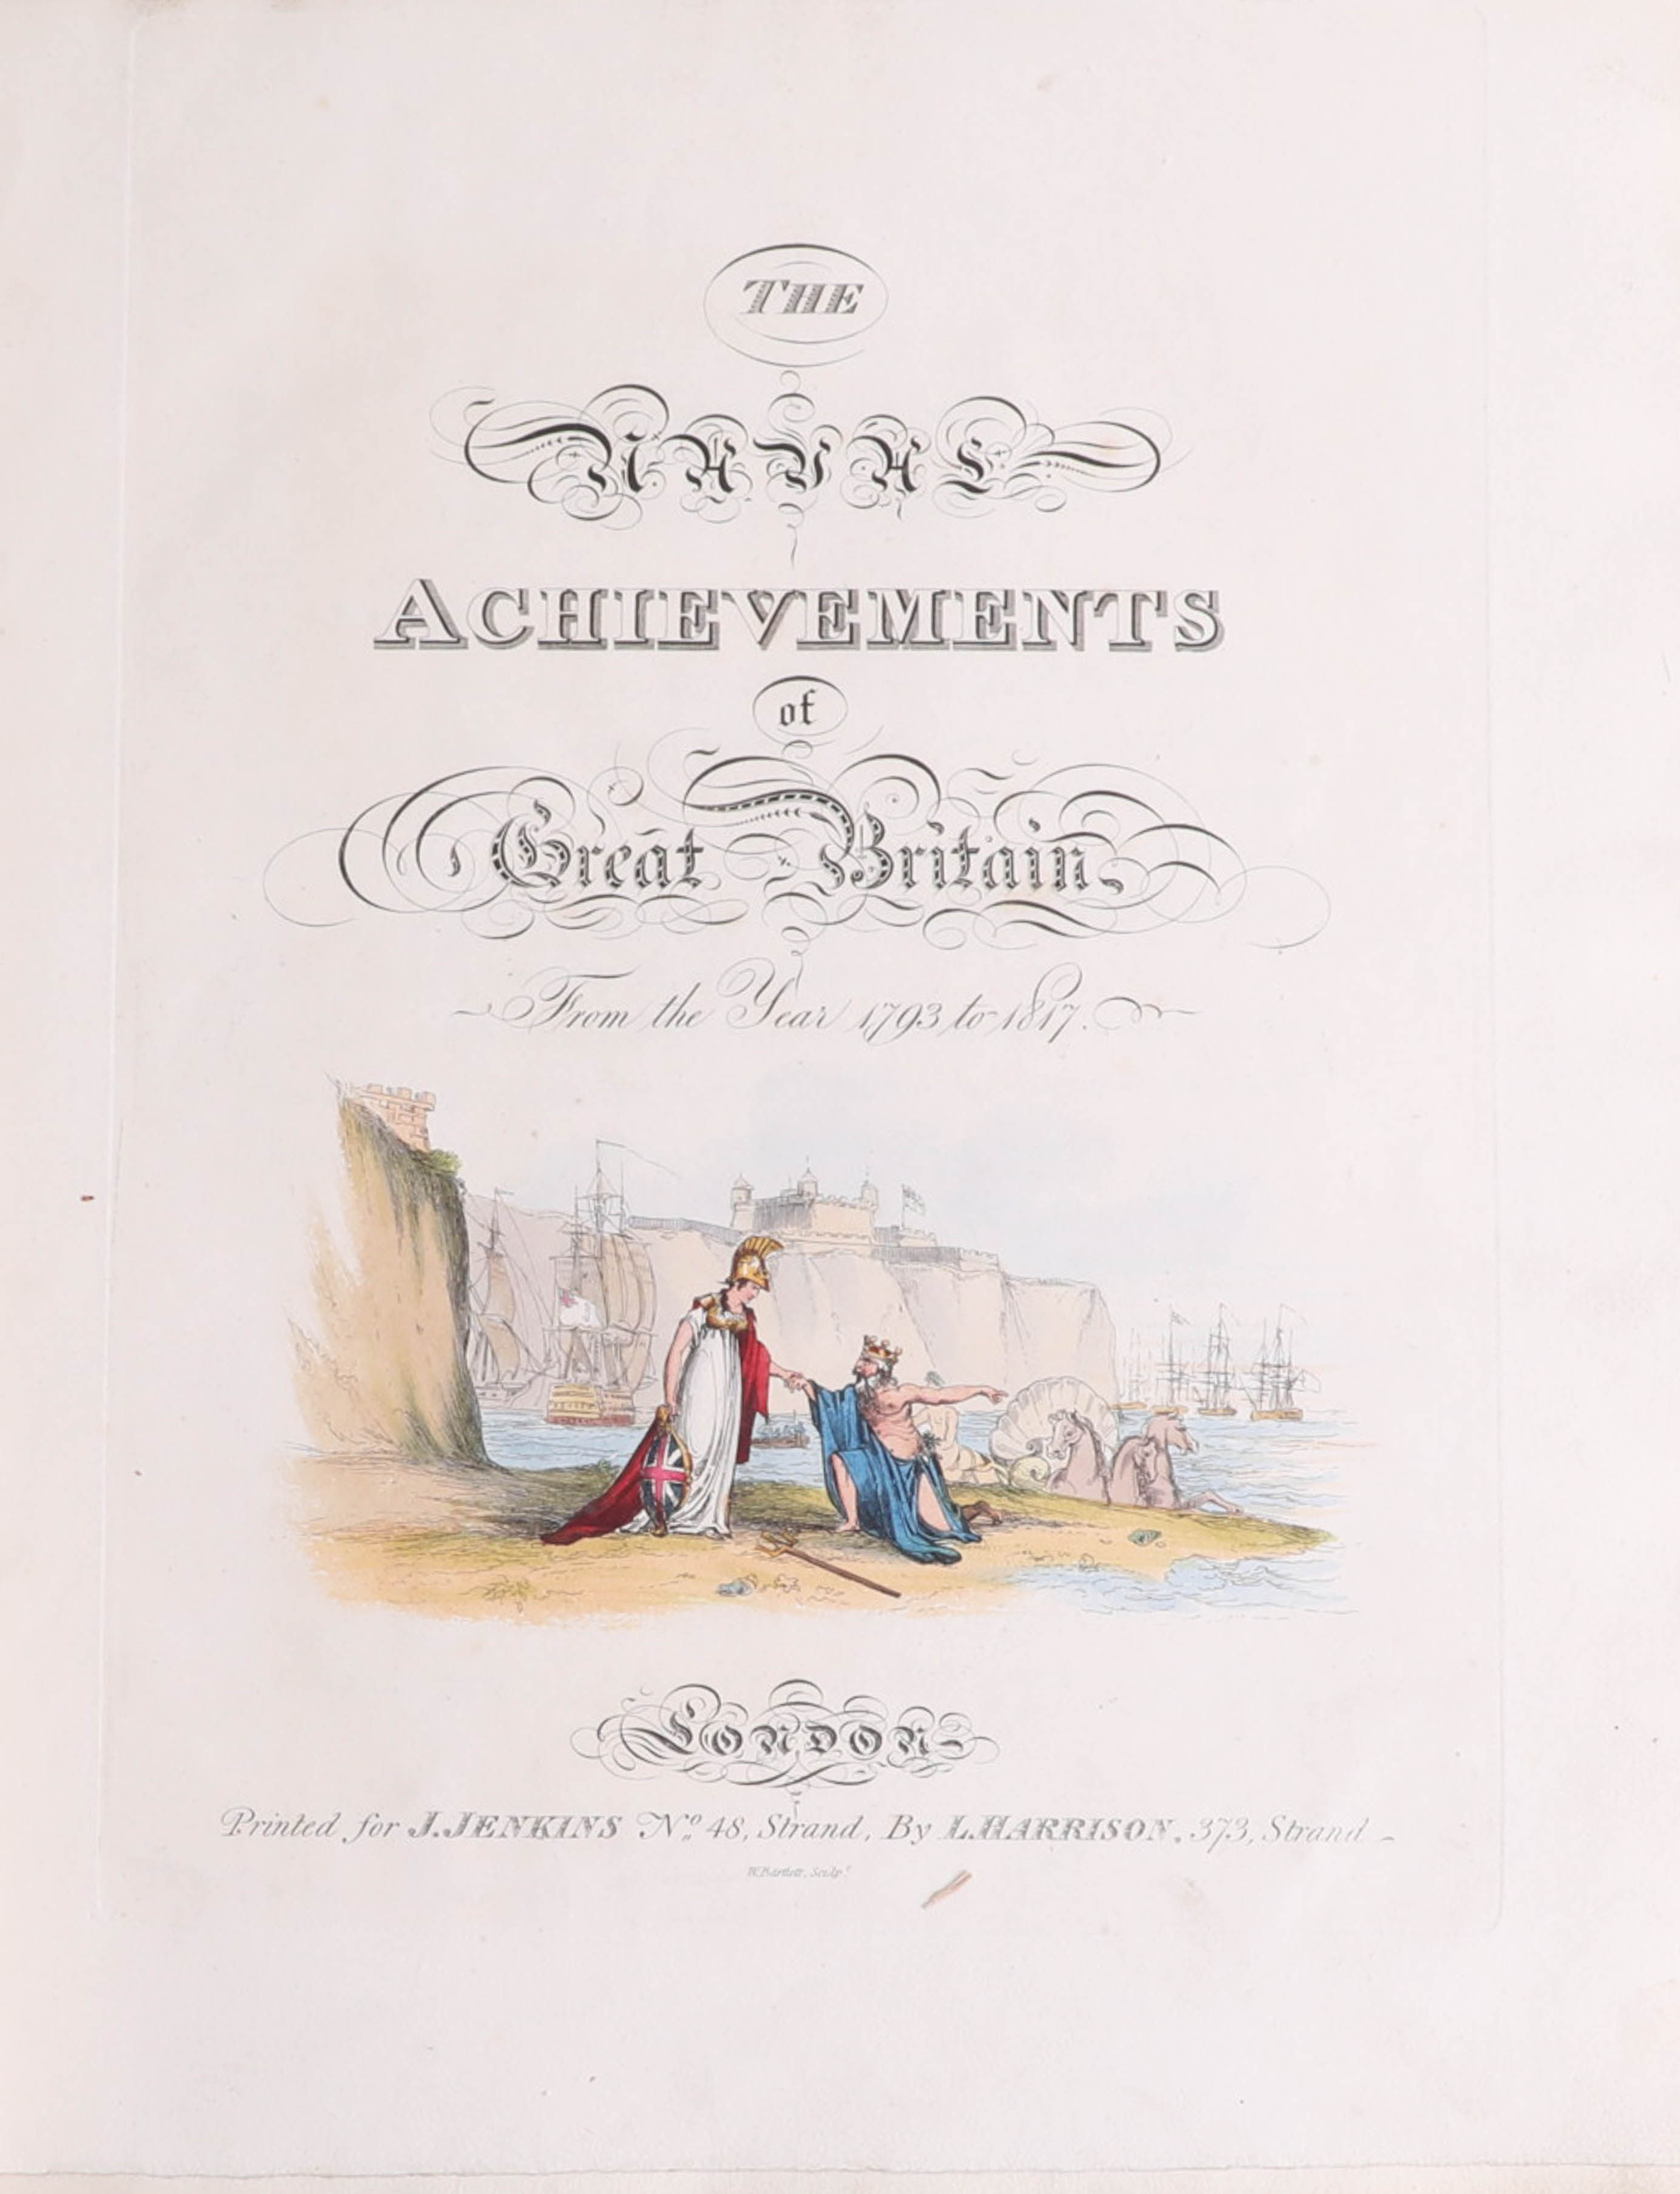 Jenkins (James) 'The Naval achievements of Great Britain from the Year 1793-1817. London' size - Image 5 of 16